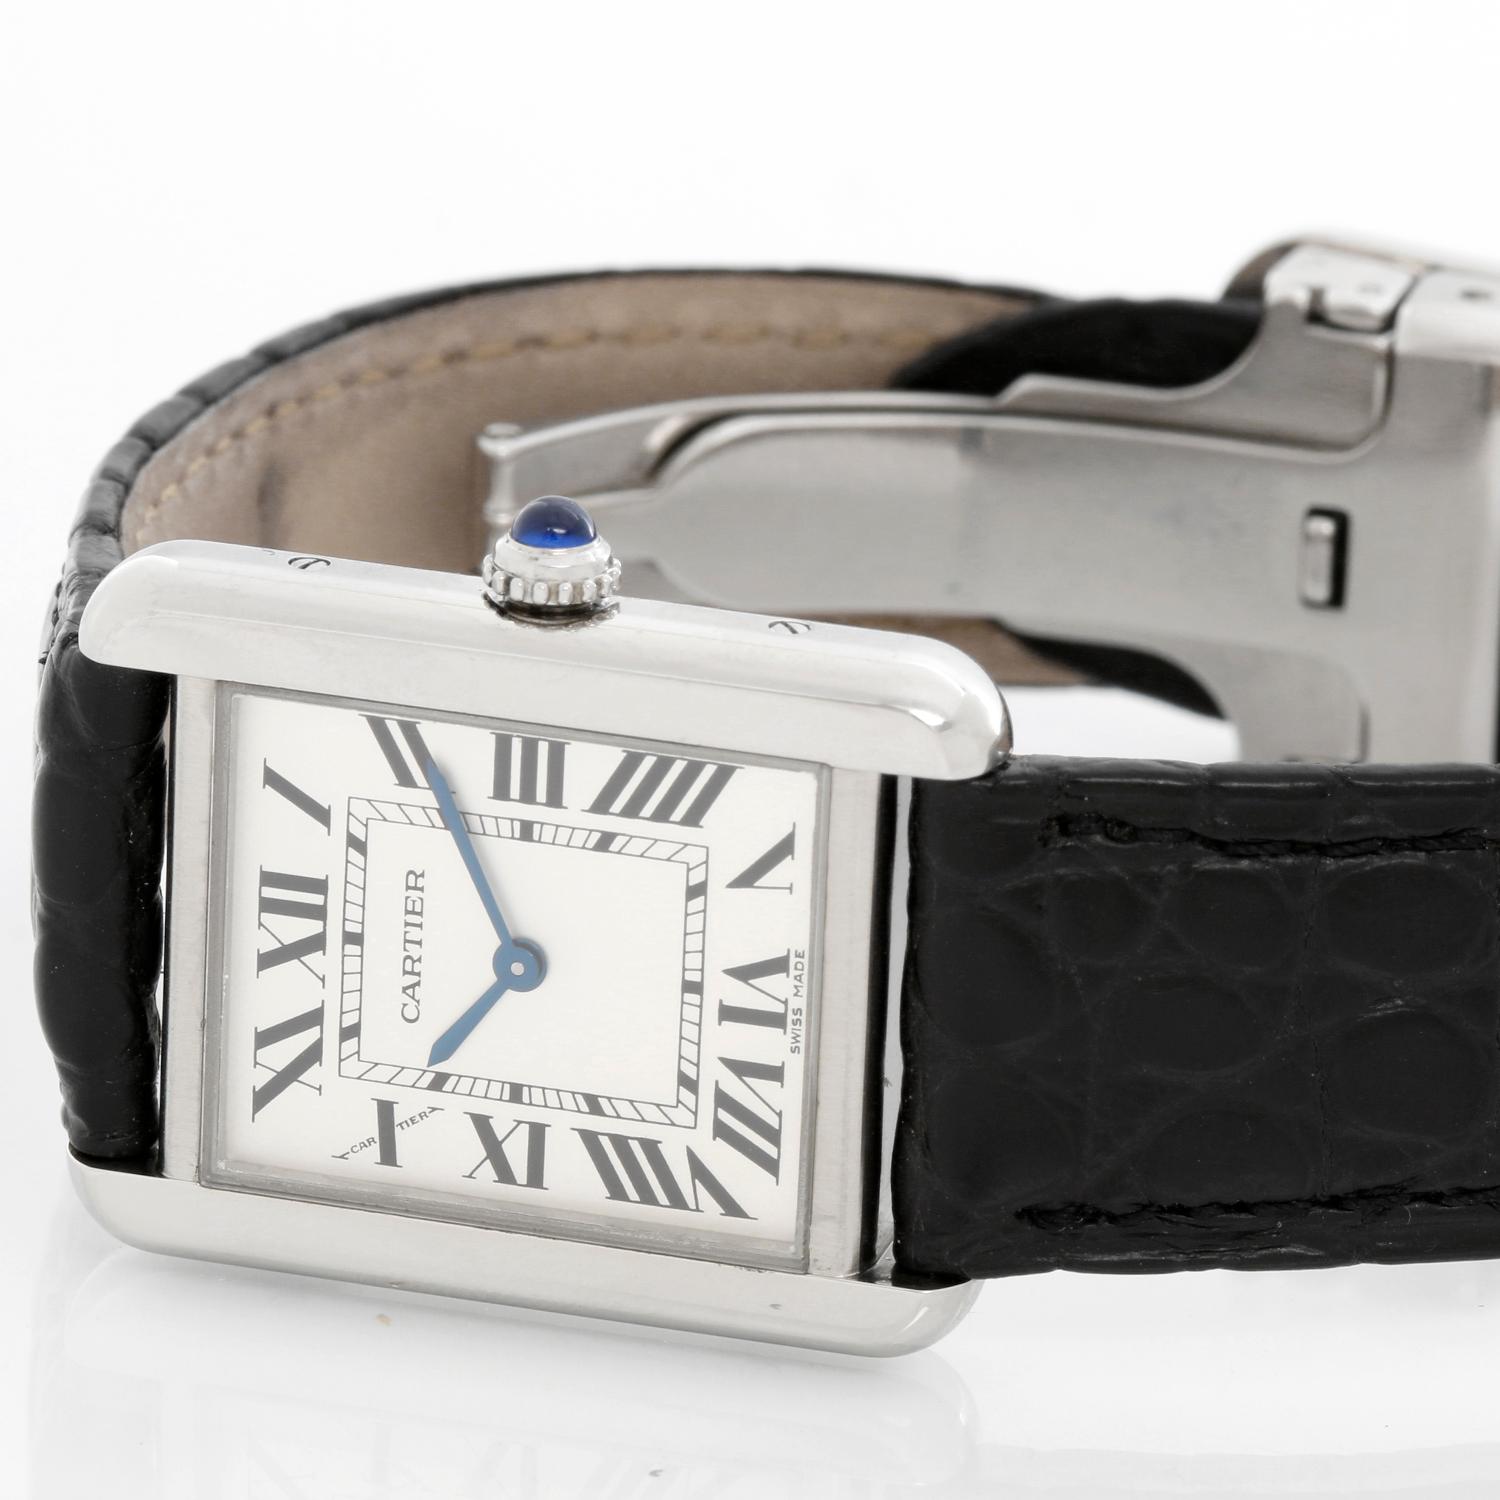 Cartier Tank Solo Stainless Steel Ladies Watch W520005 - Quartz. Stainless steel case (24mm x 30mm). Silver dial with black Roman numerals. Black strap band with Cartier deployant buckle . Pre-owned with custom box and Cartier papers